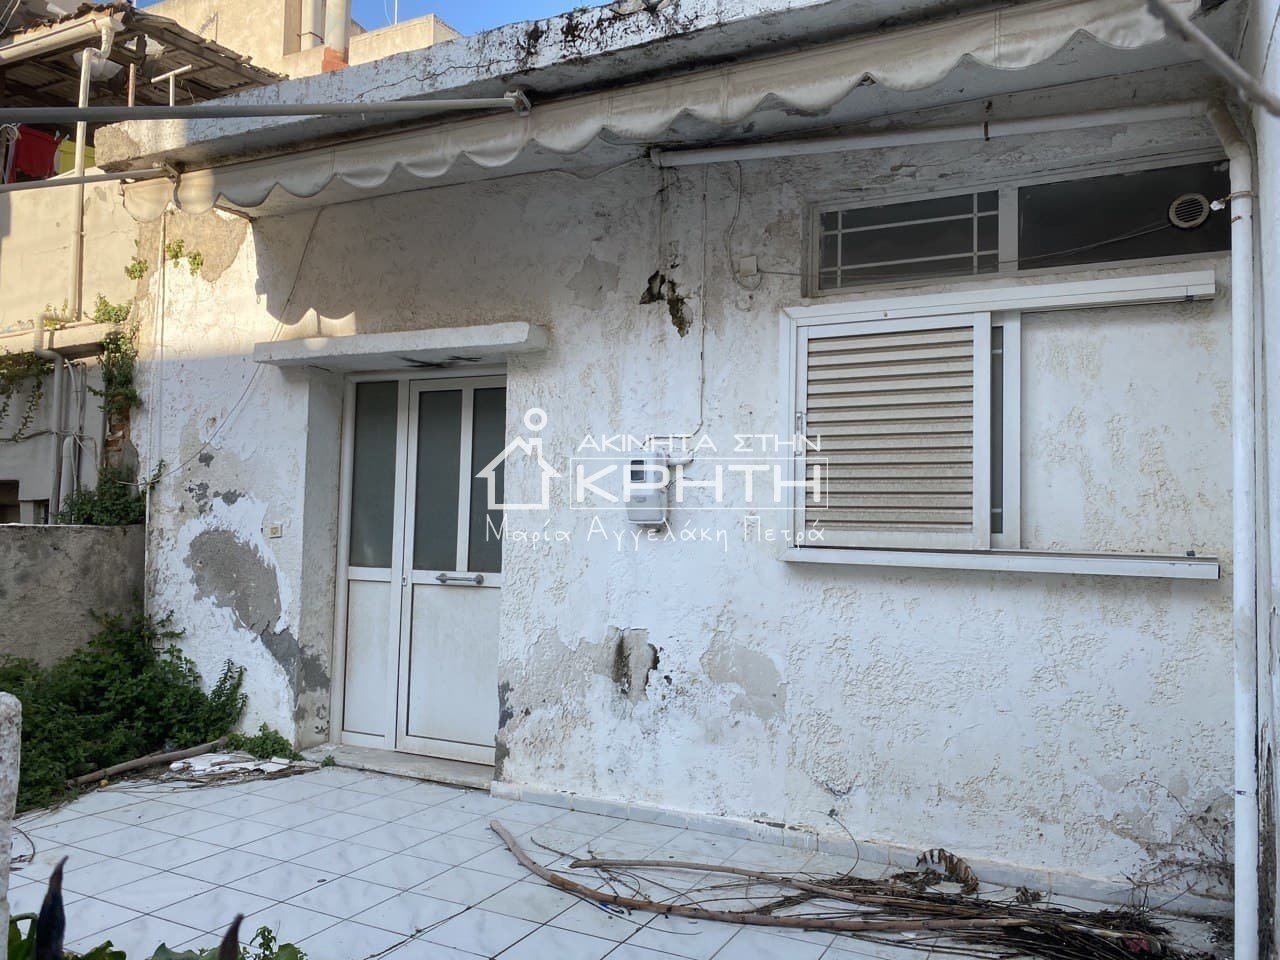 DETACHED HOUSE For sale - HERAKLION A ZONE